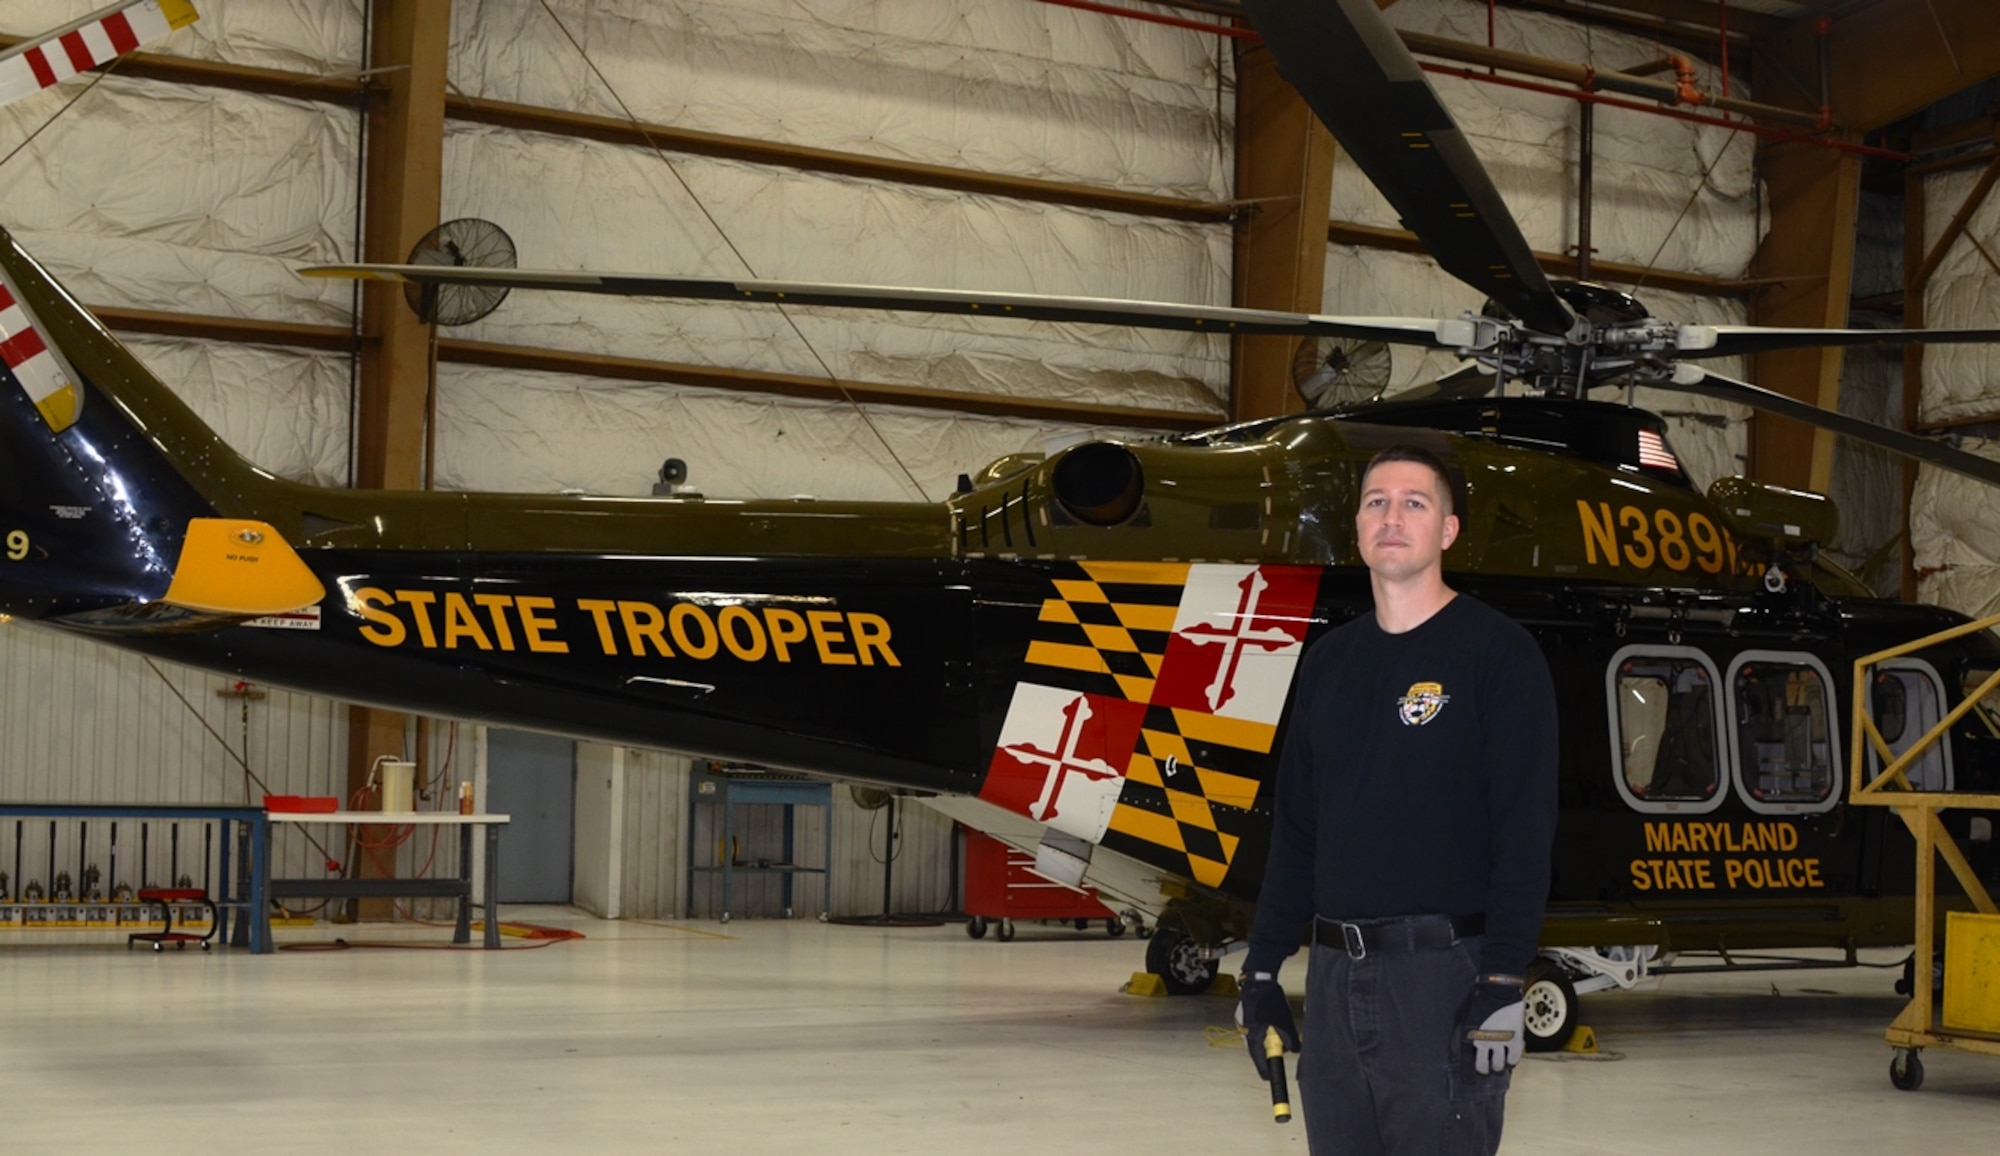 Tech. Sgt. Timothy Dash stands in front of a Maryland State Police Helicopter at Martin State Airport in Baltimore December 4th. Dash is the 175th Wing Spotlight Airman for January 2016. In his civilian job, Dash is a Maryland State Police helicopter mechanic. (U.S. Air National Guard photo by Senior Master Sgt. Ed Bard/RELEASED)
